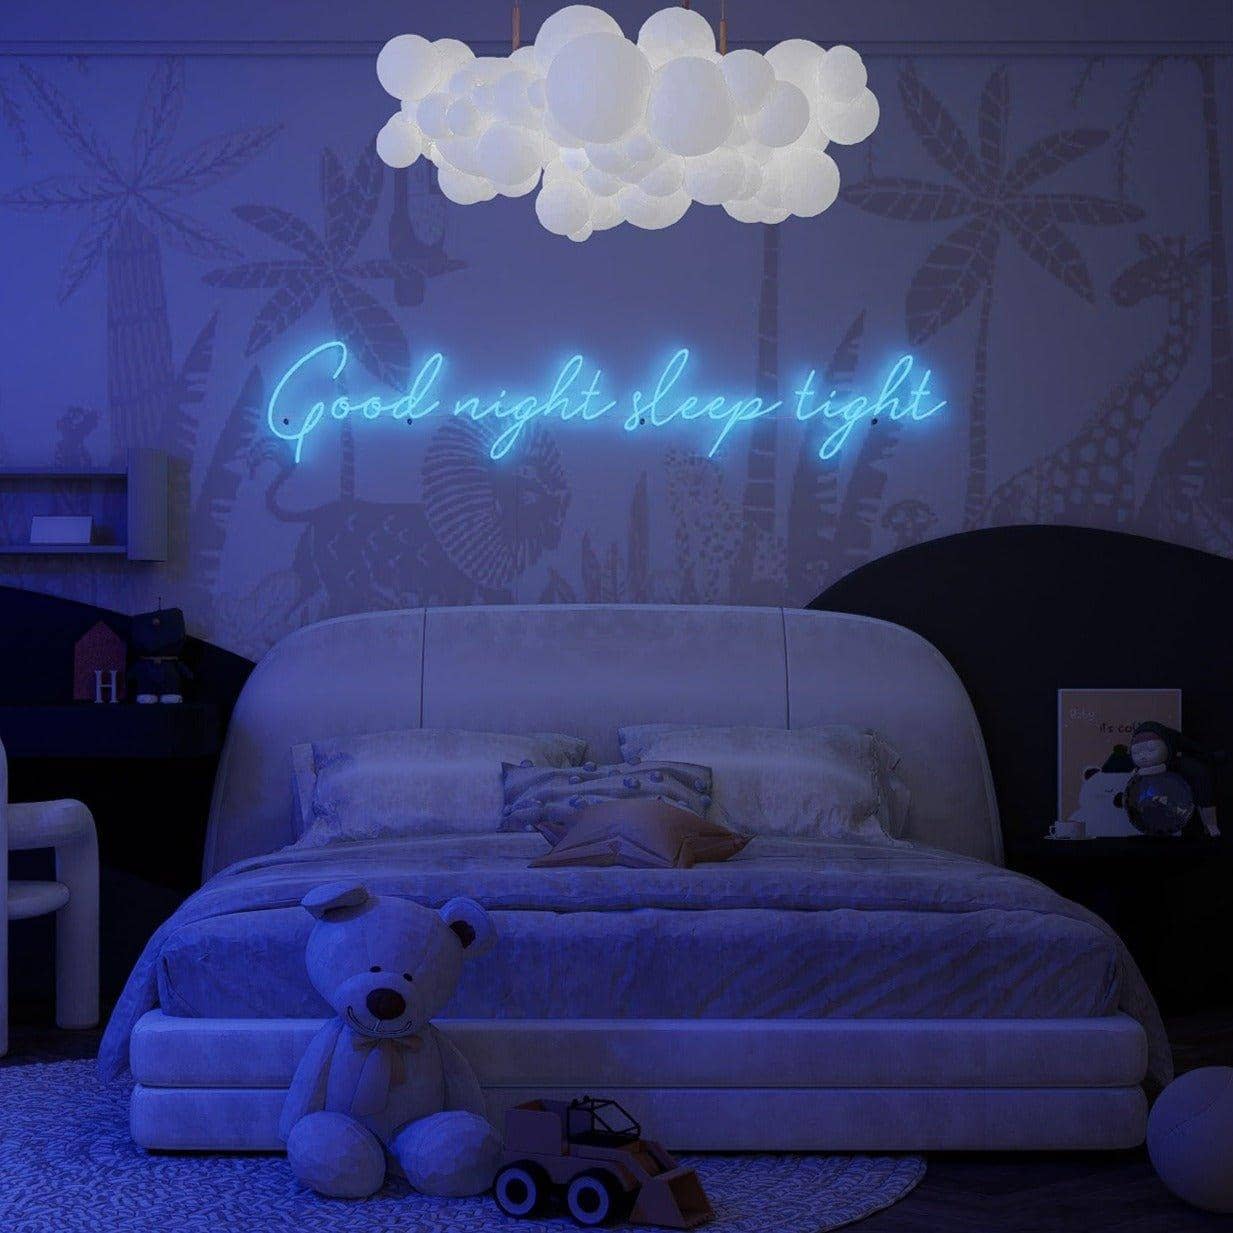 light-up-blue-neon-picture-hanging-on-wall-display-at-night-good-night-sleep-tight